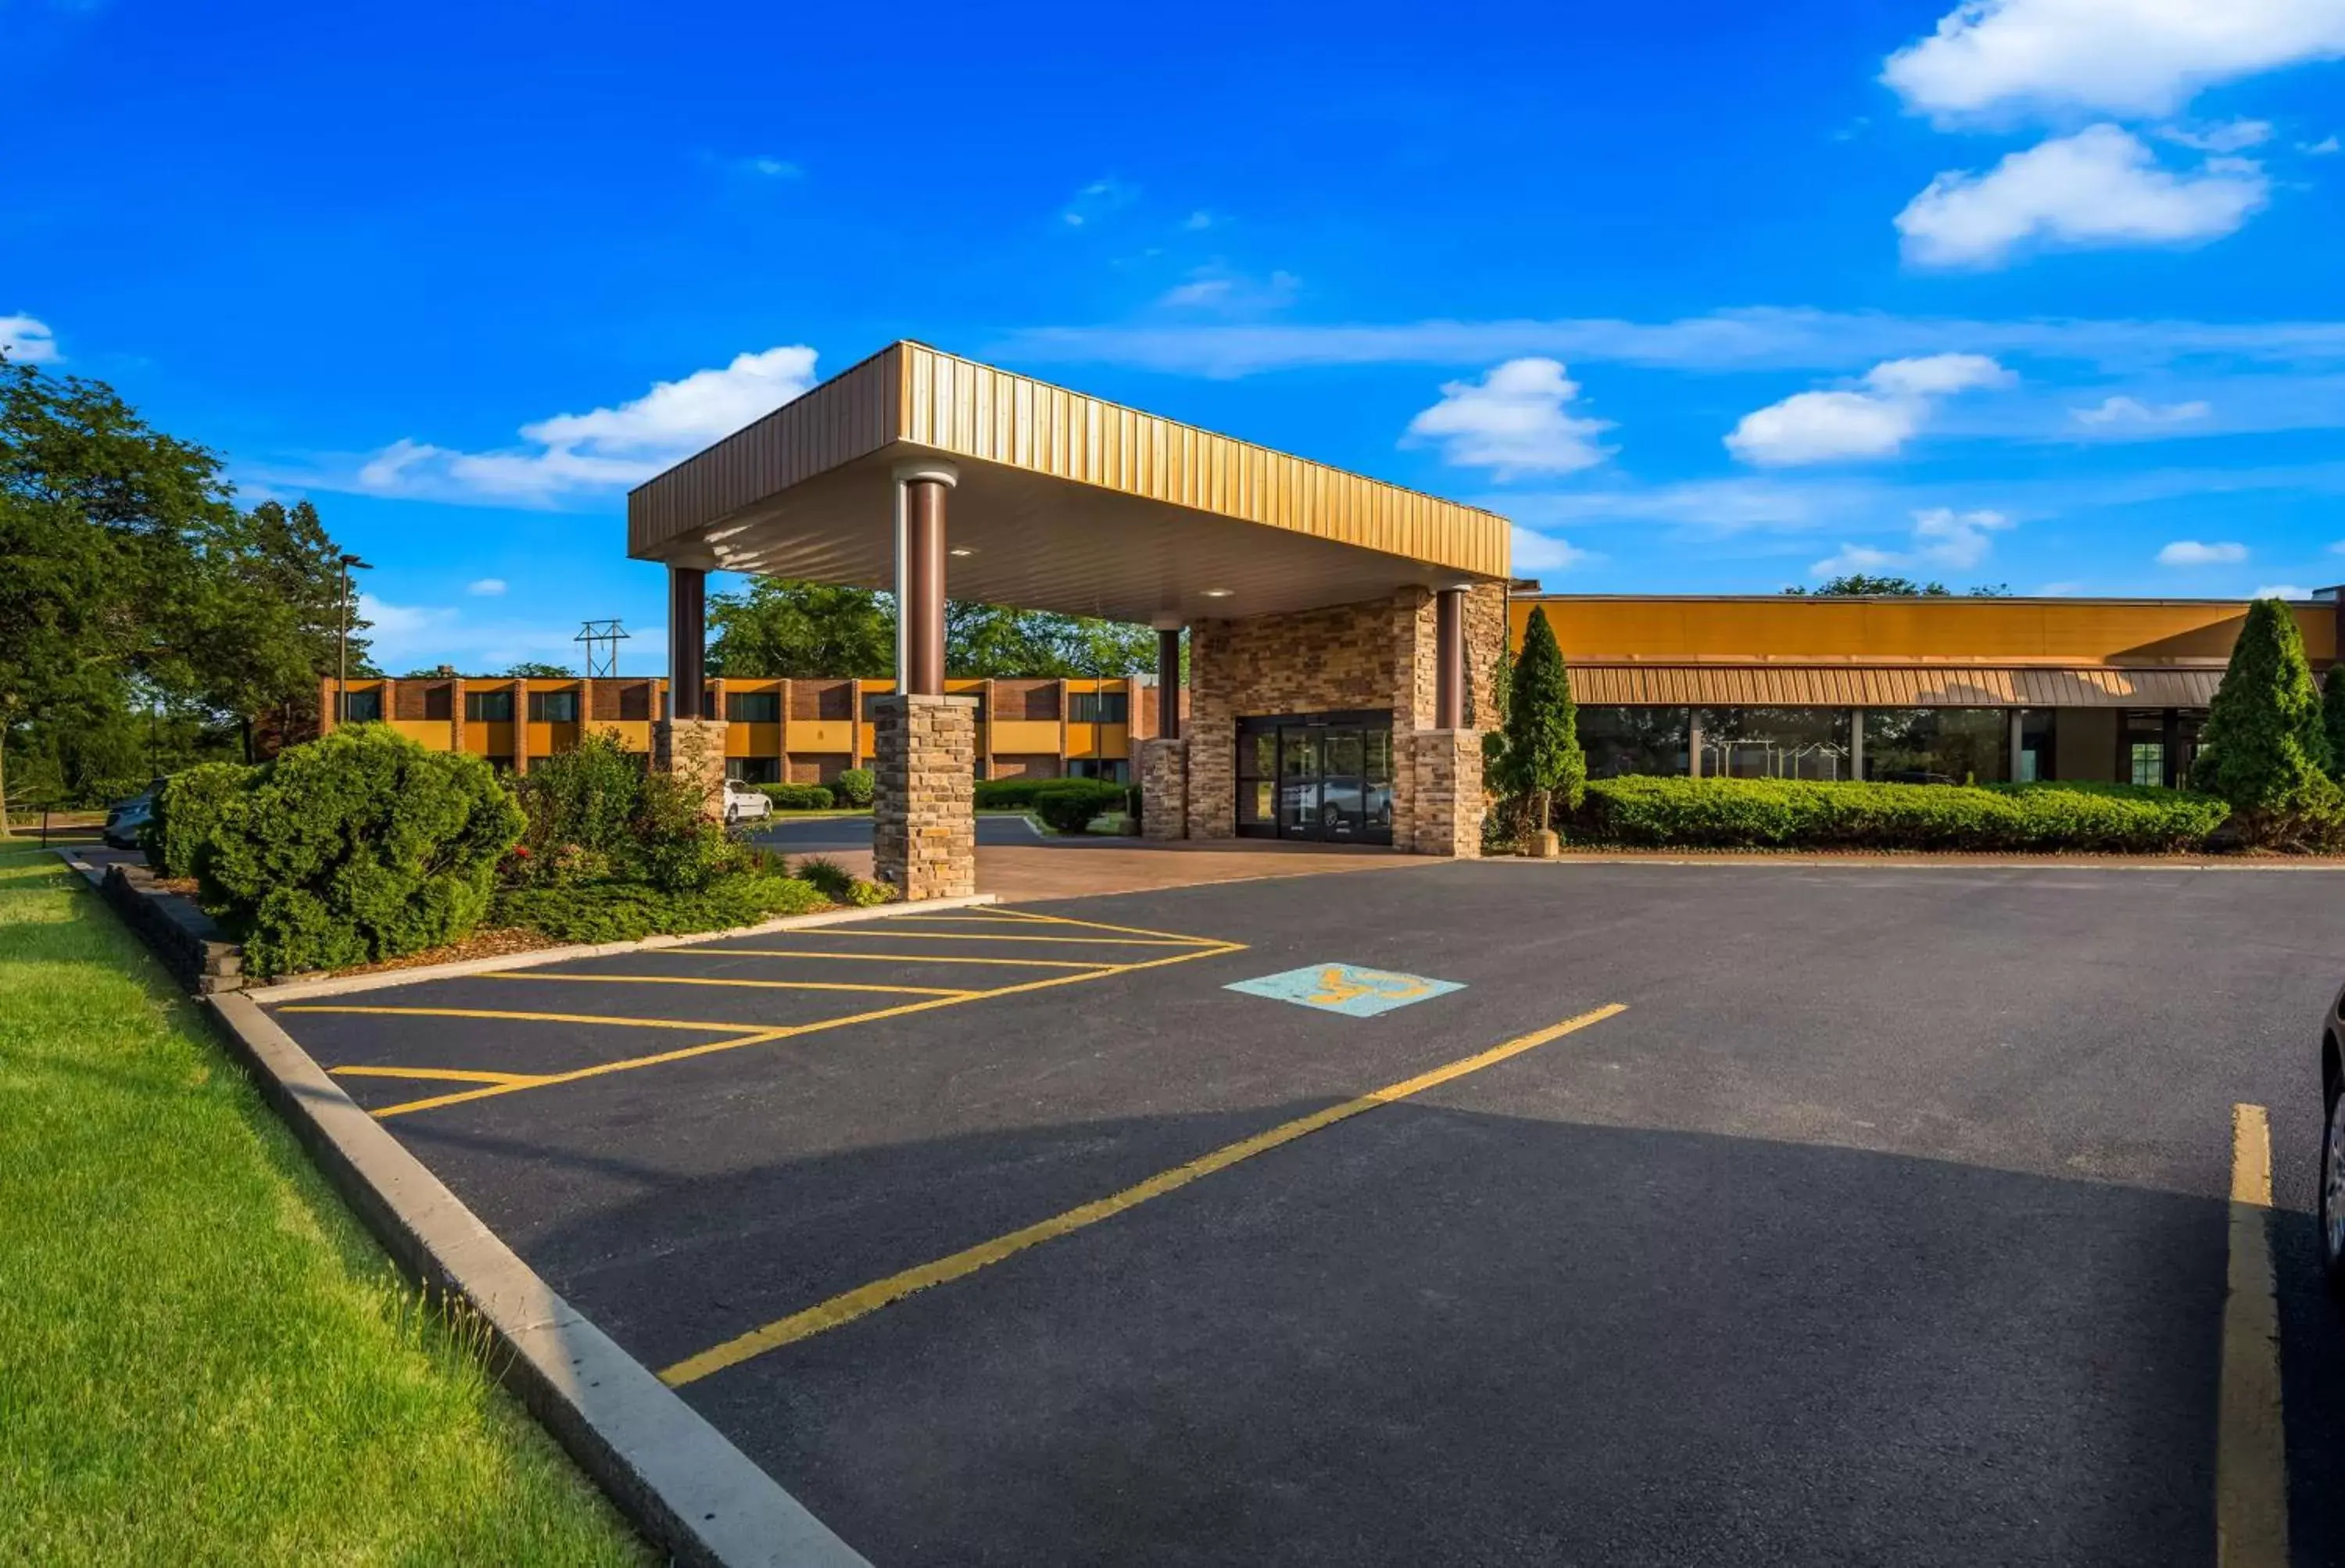 Property building in Best Western Prairie Inn & Conference Center